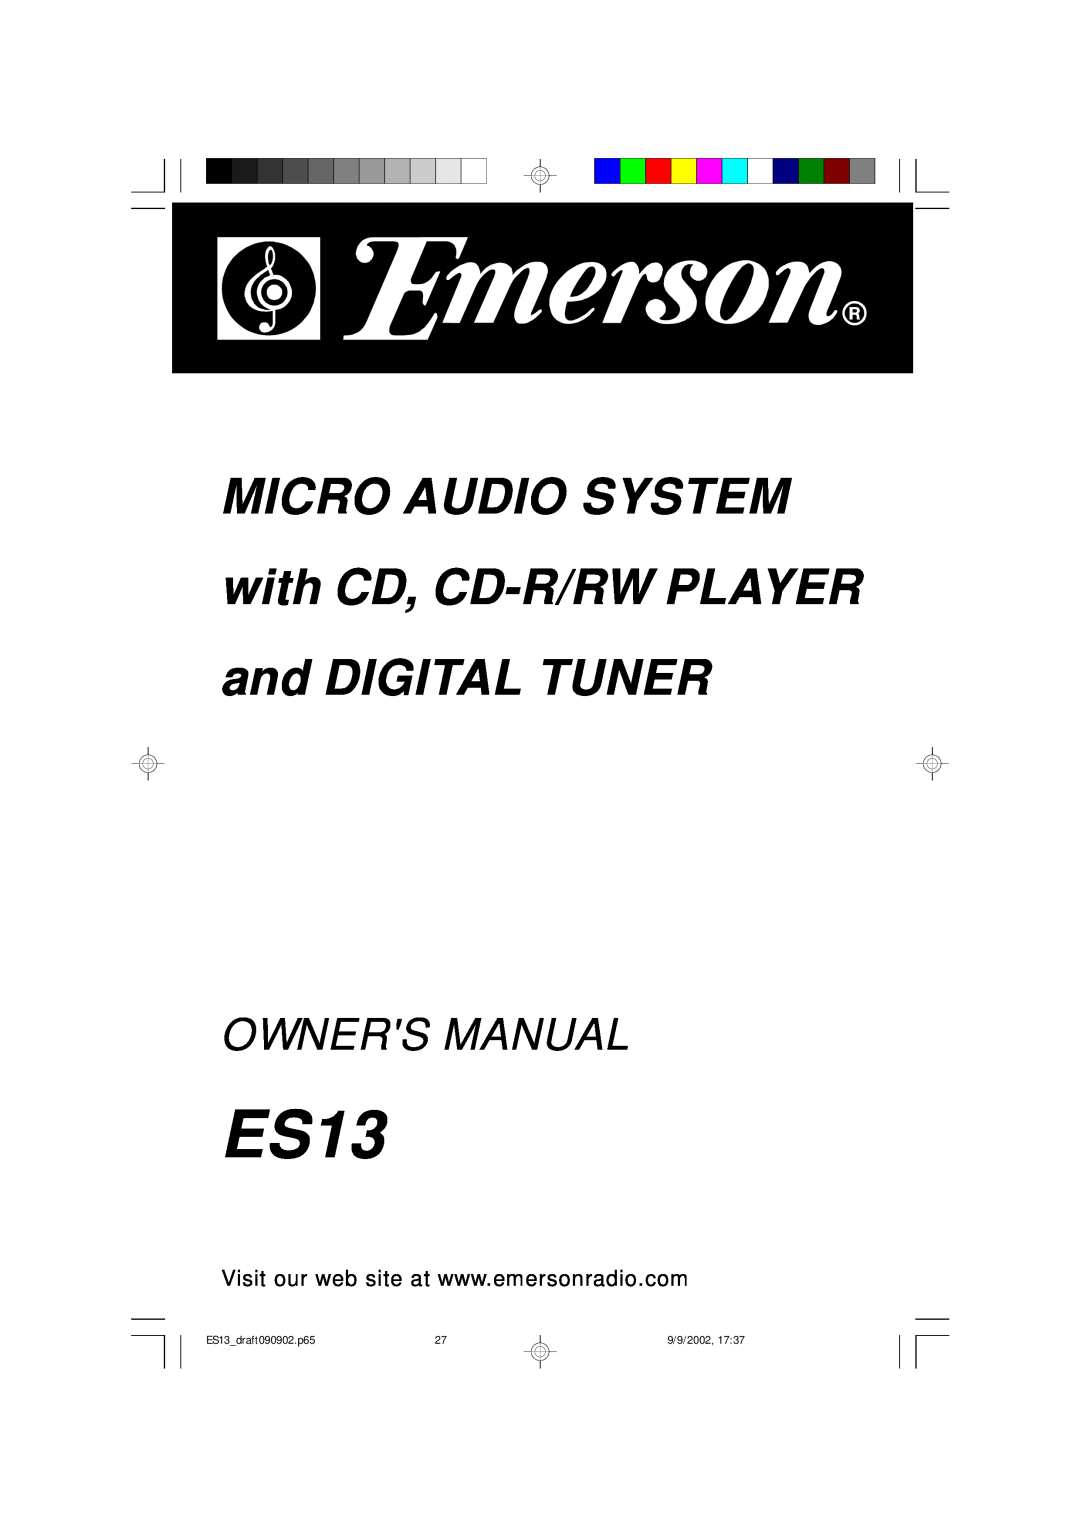 Emerson owner manual MICRO AUDIO SYSTEM with CD, CD-R/RWPLAYER, and DIGITAL TUNER, ES13 draft090902.p65 